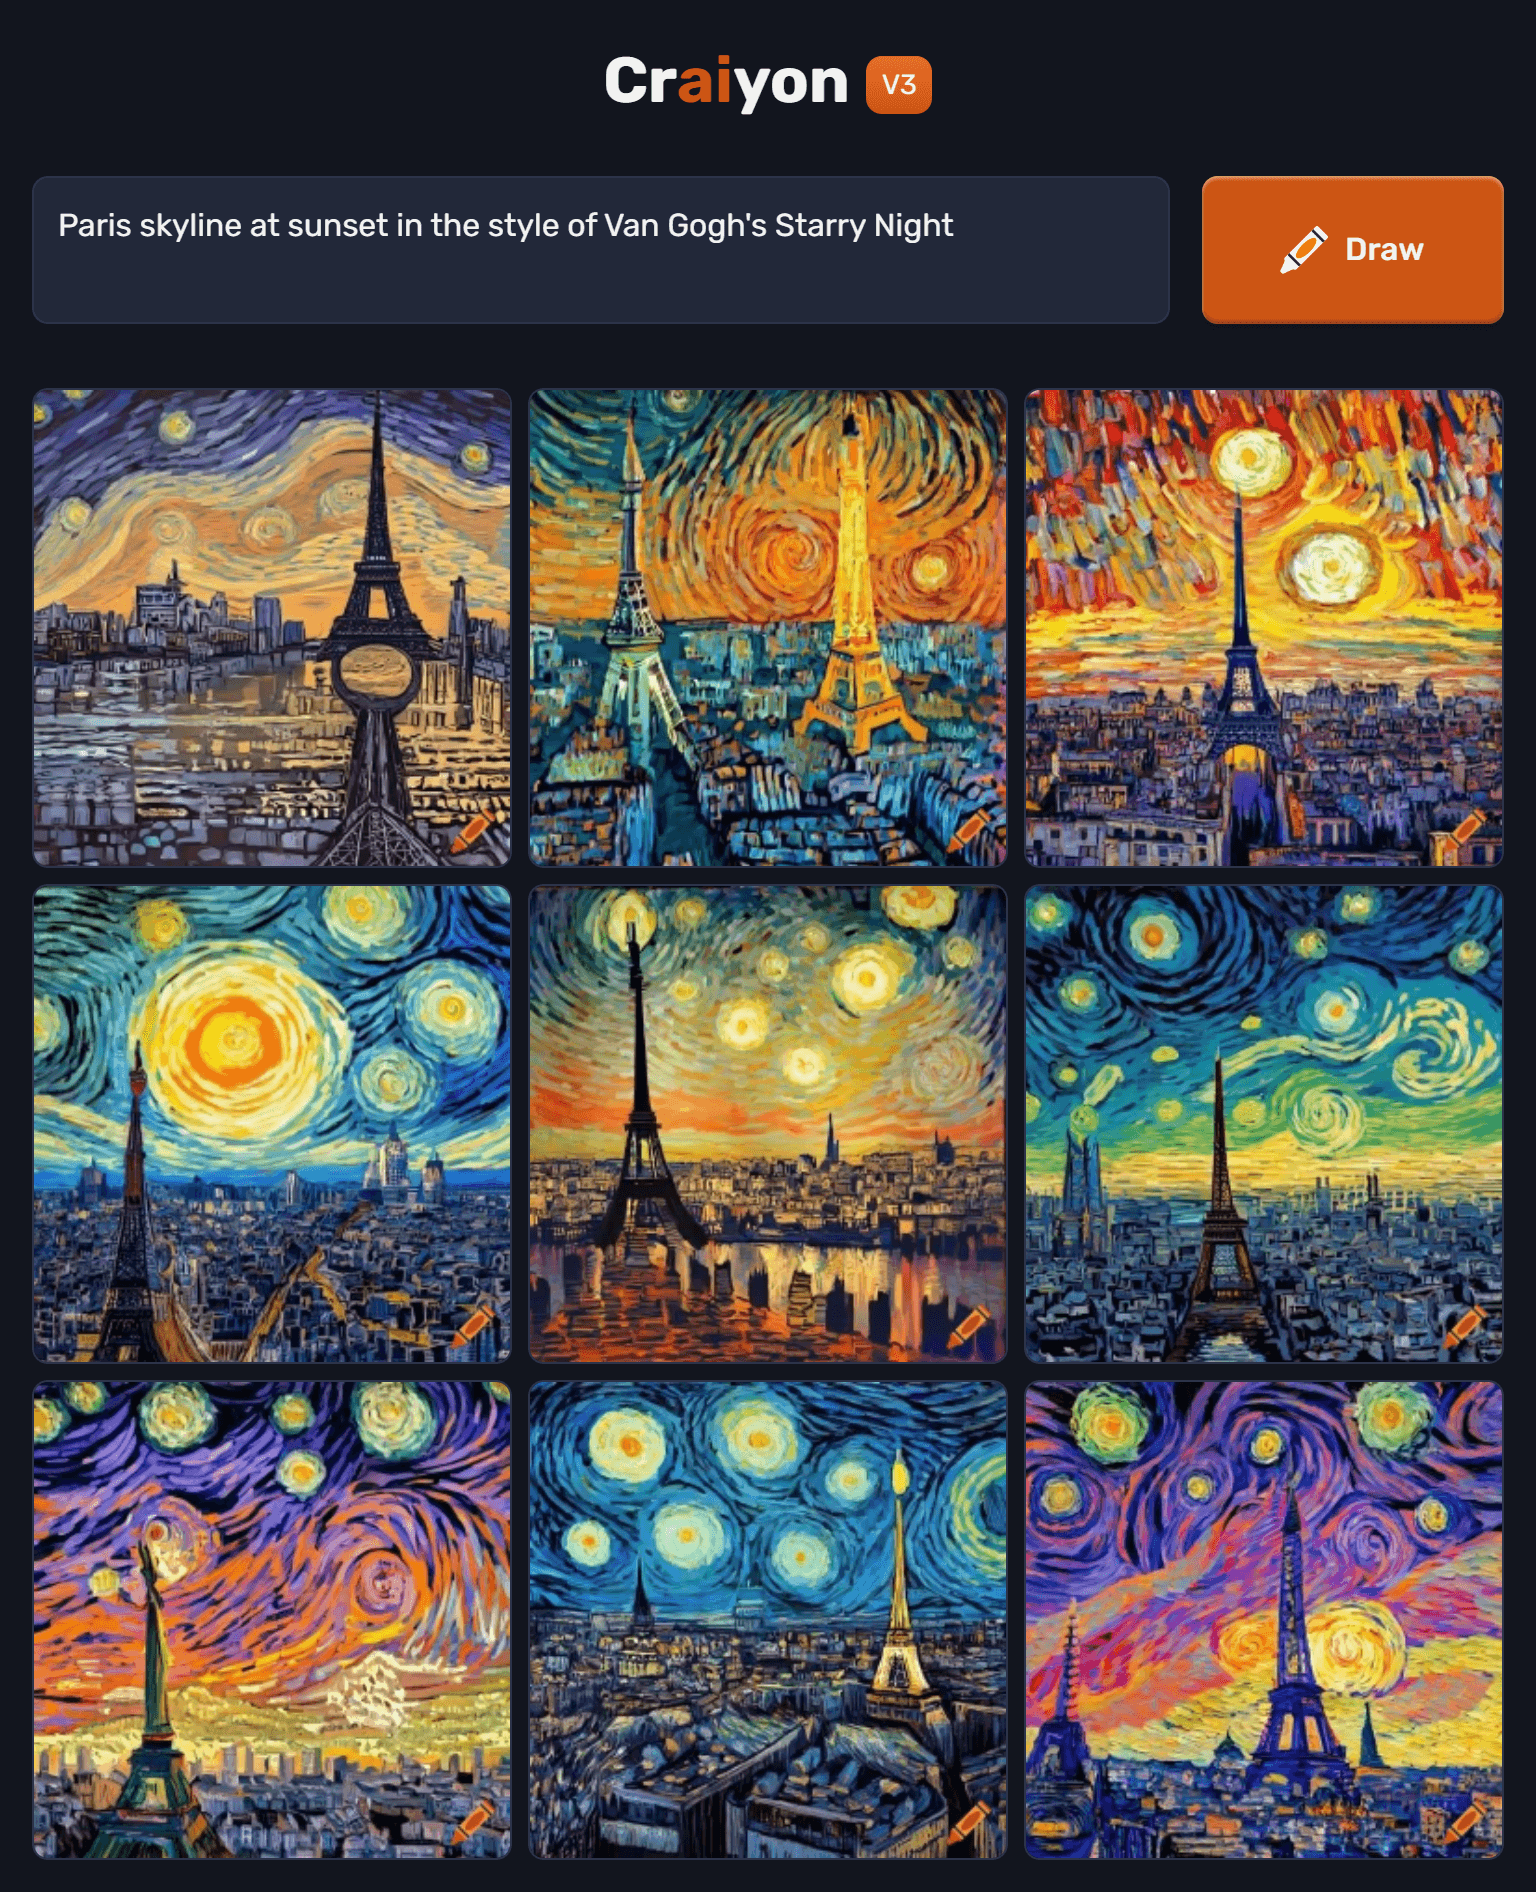 craion ai_172807_Paris_skyline_at_sunset_in_the_style_of_Van_Gogh_s_Starry_Night.png